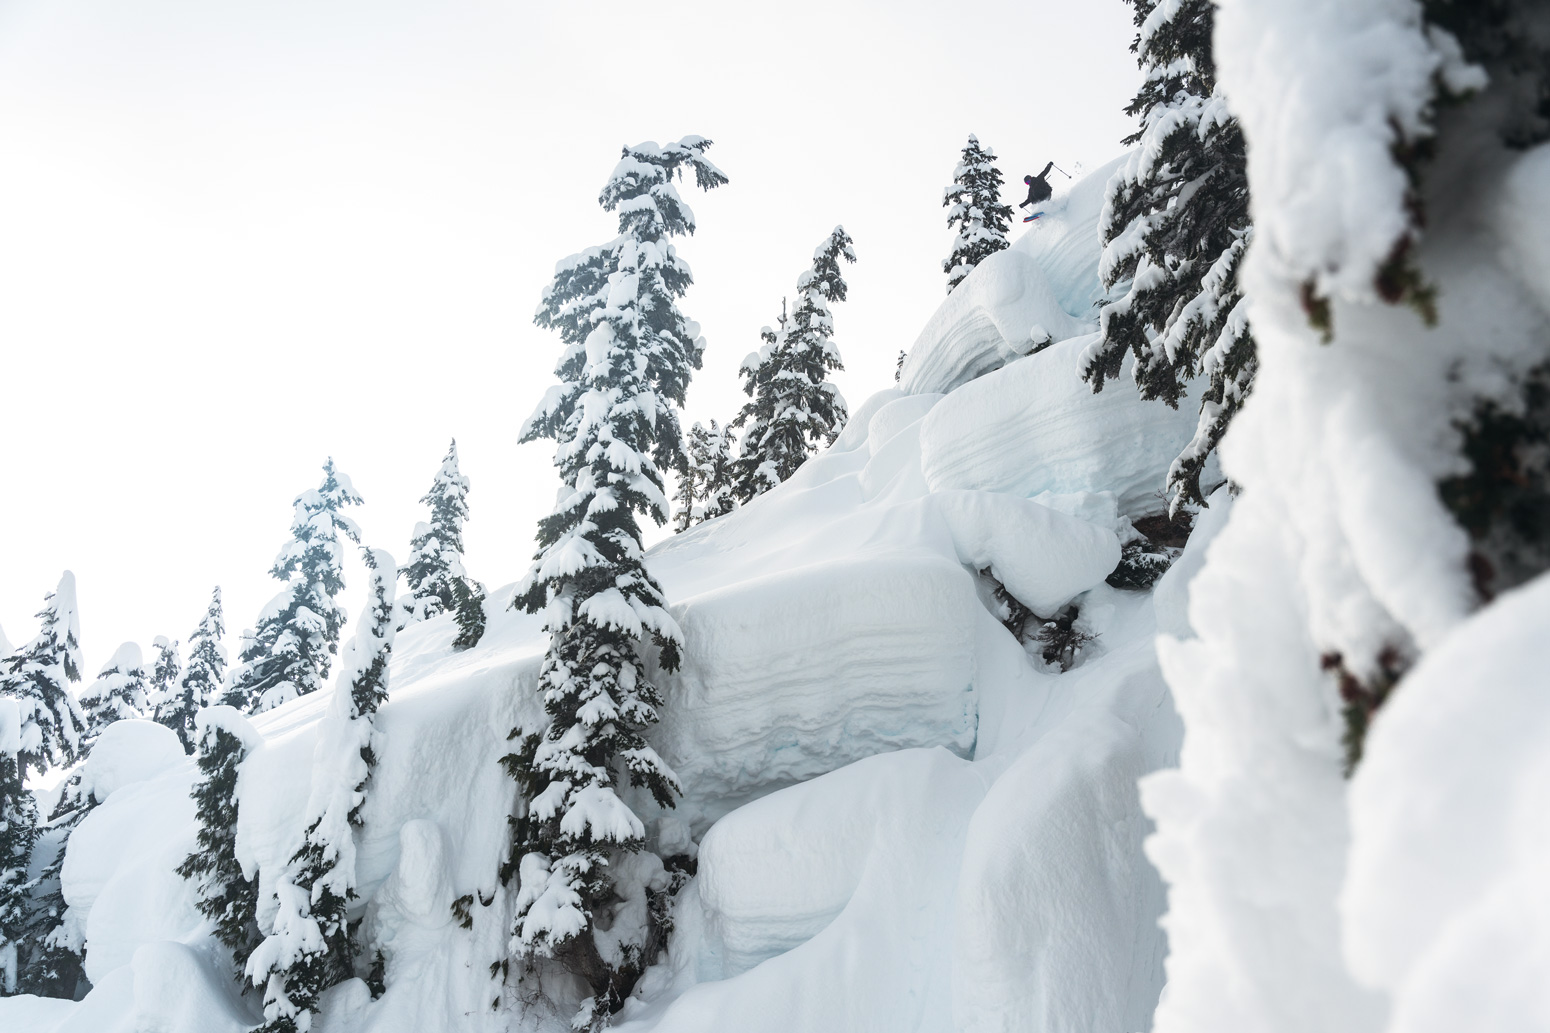 Bred in the mini-golf zones of Whitewater, BC, Kuch is right at home in pillow paradise. Photo: Christian Raguse